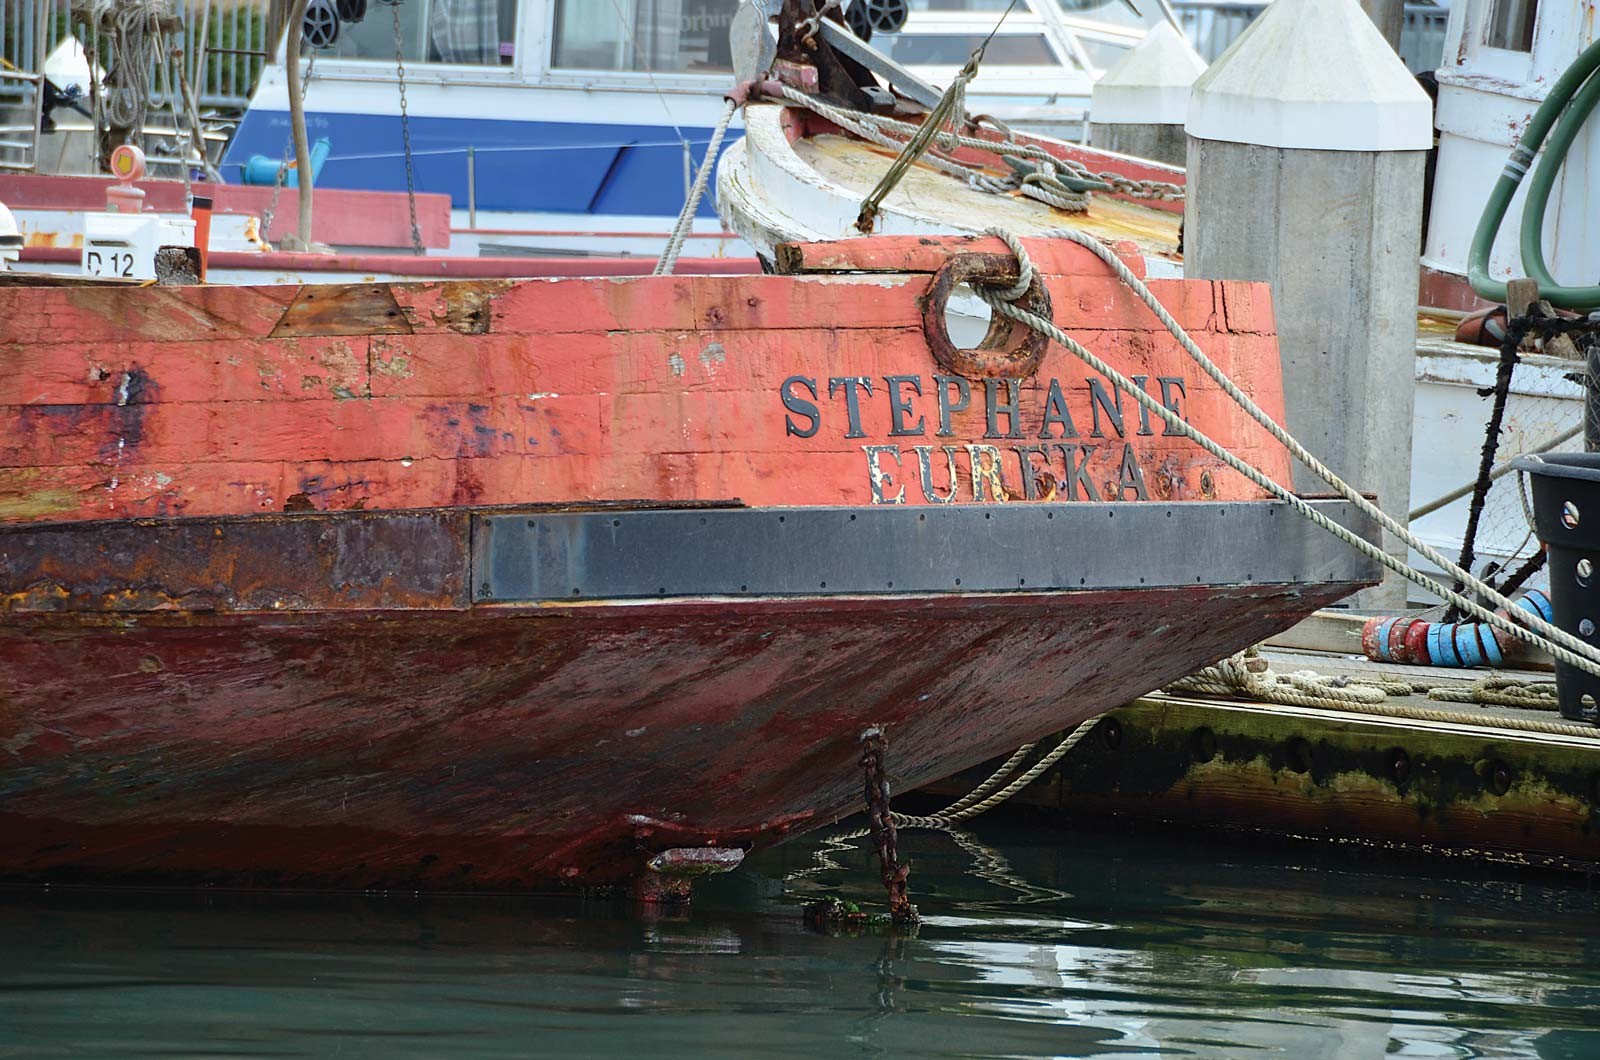 The Stephanie, a former trawler built in 1917 in San Francisco by Genoa Boat Works, is the second oldest boat on the bay (the Madaket's the oldest). Cody Hills is slowly restoring it. - PHOTO BY DREW HYLAND